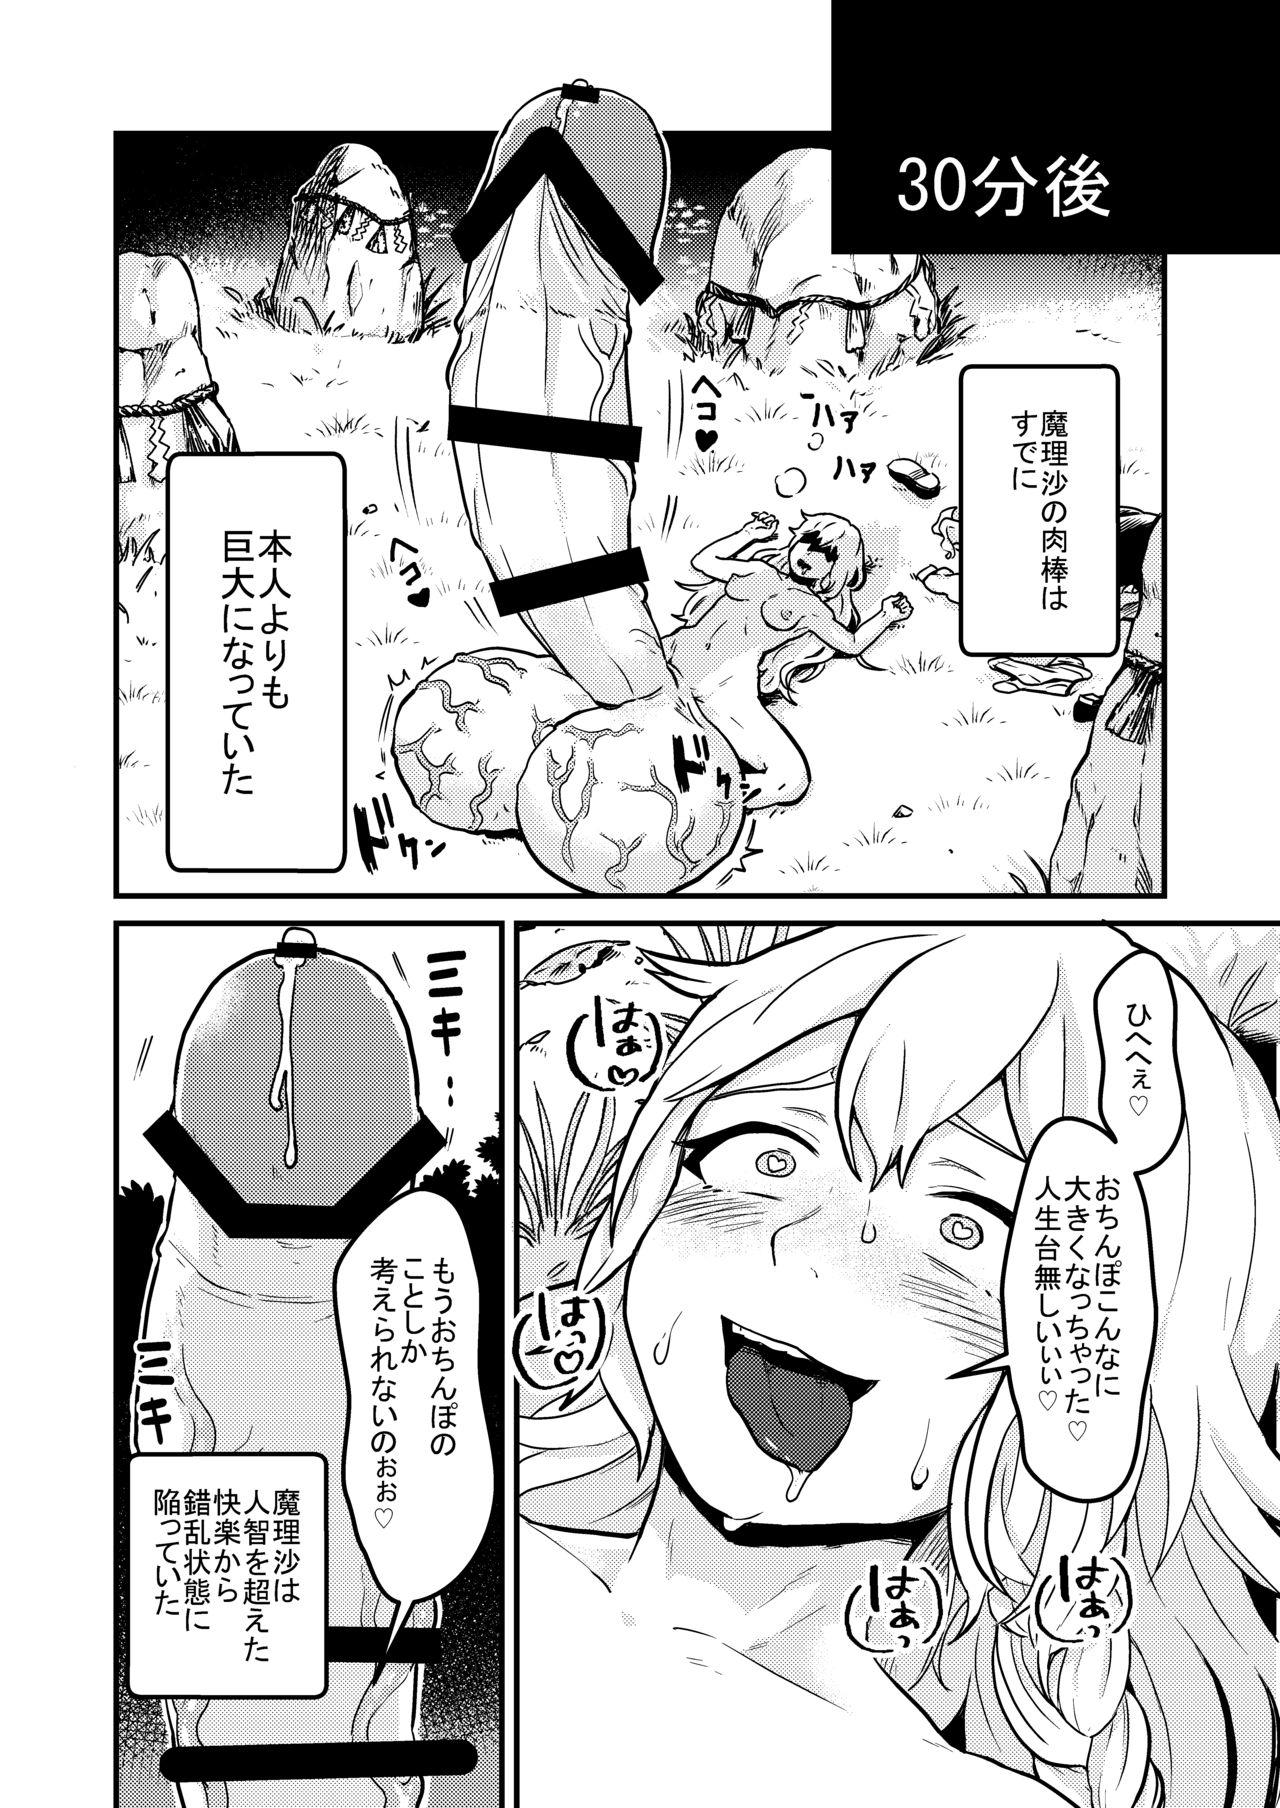 Missionary Porn Marisa Expansion Burst - Touhou project Wank - Page 9